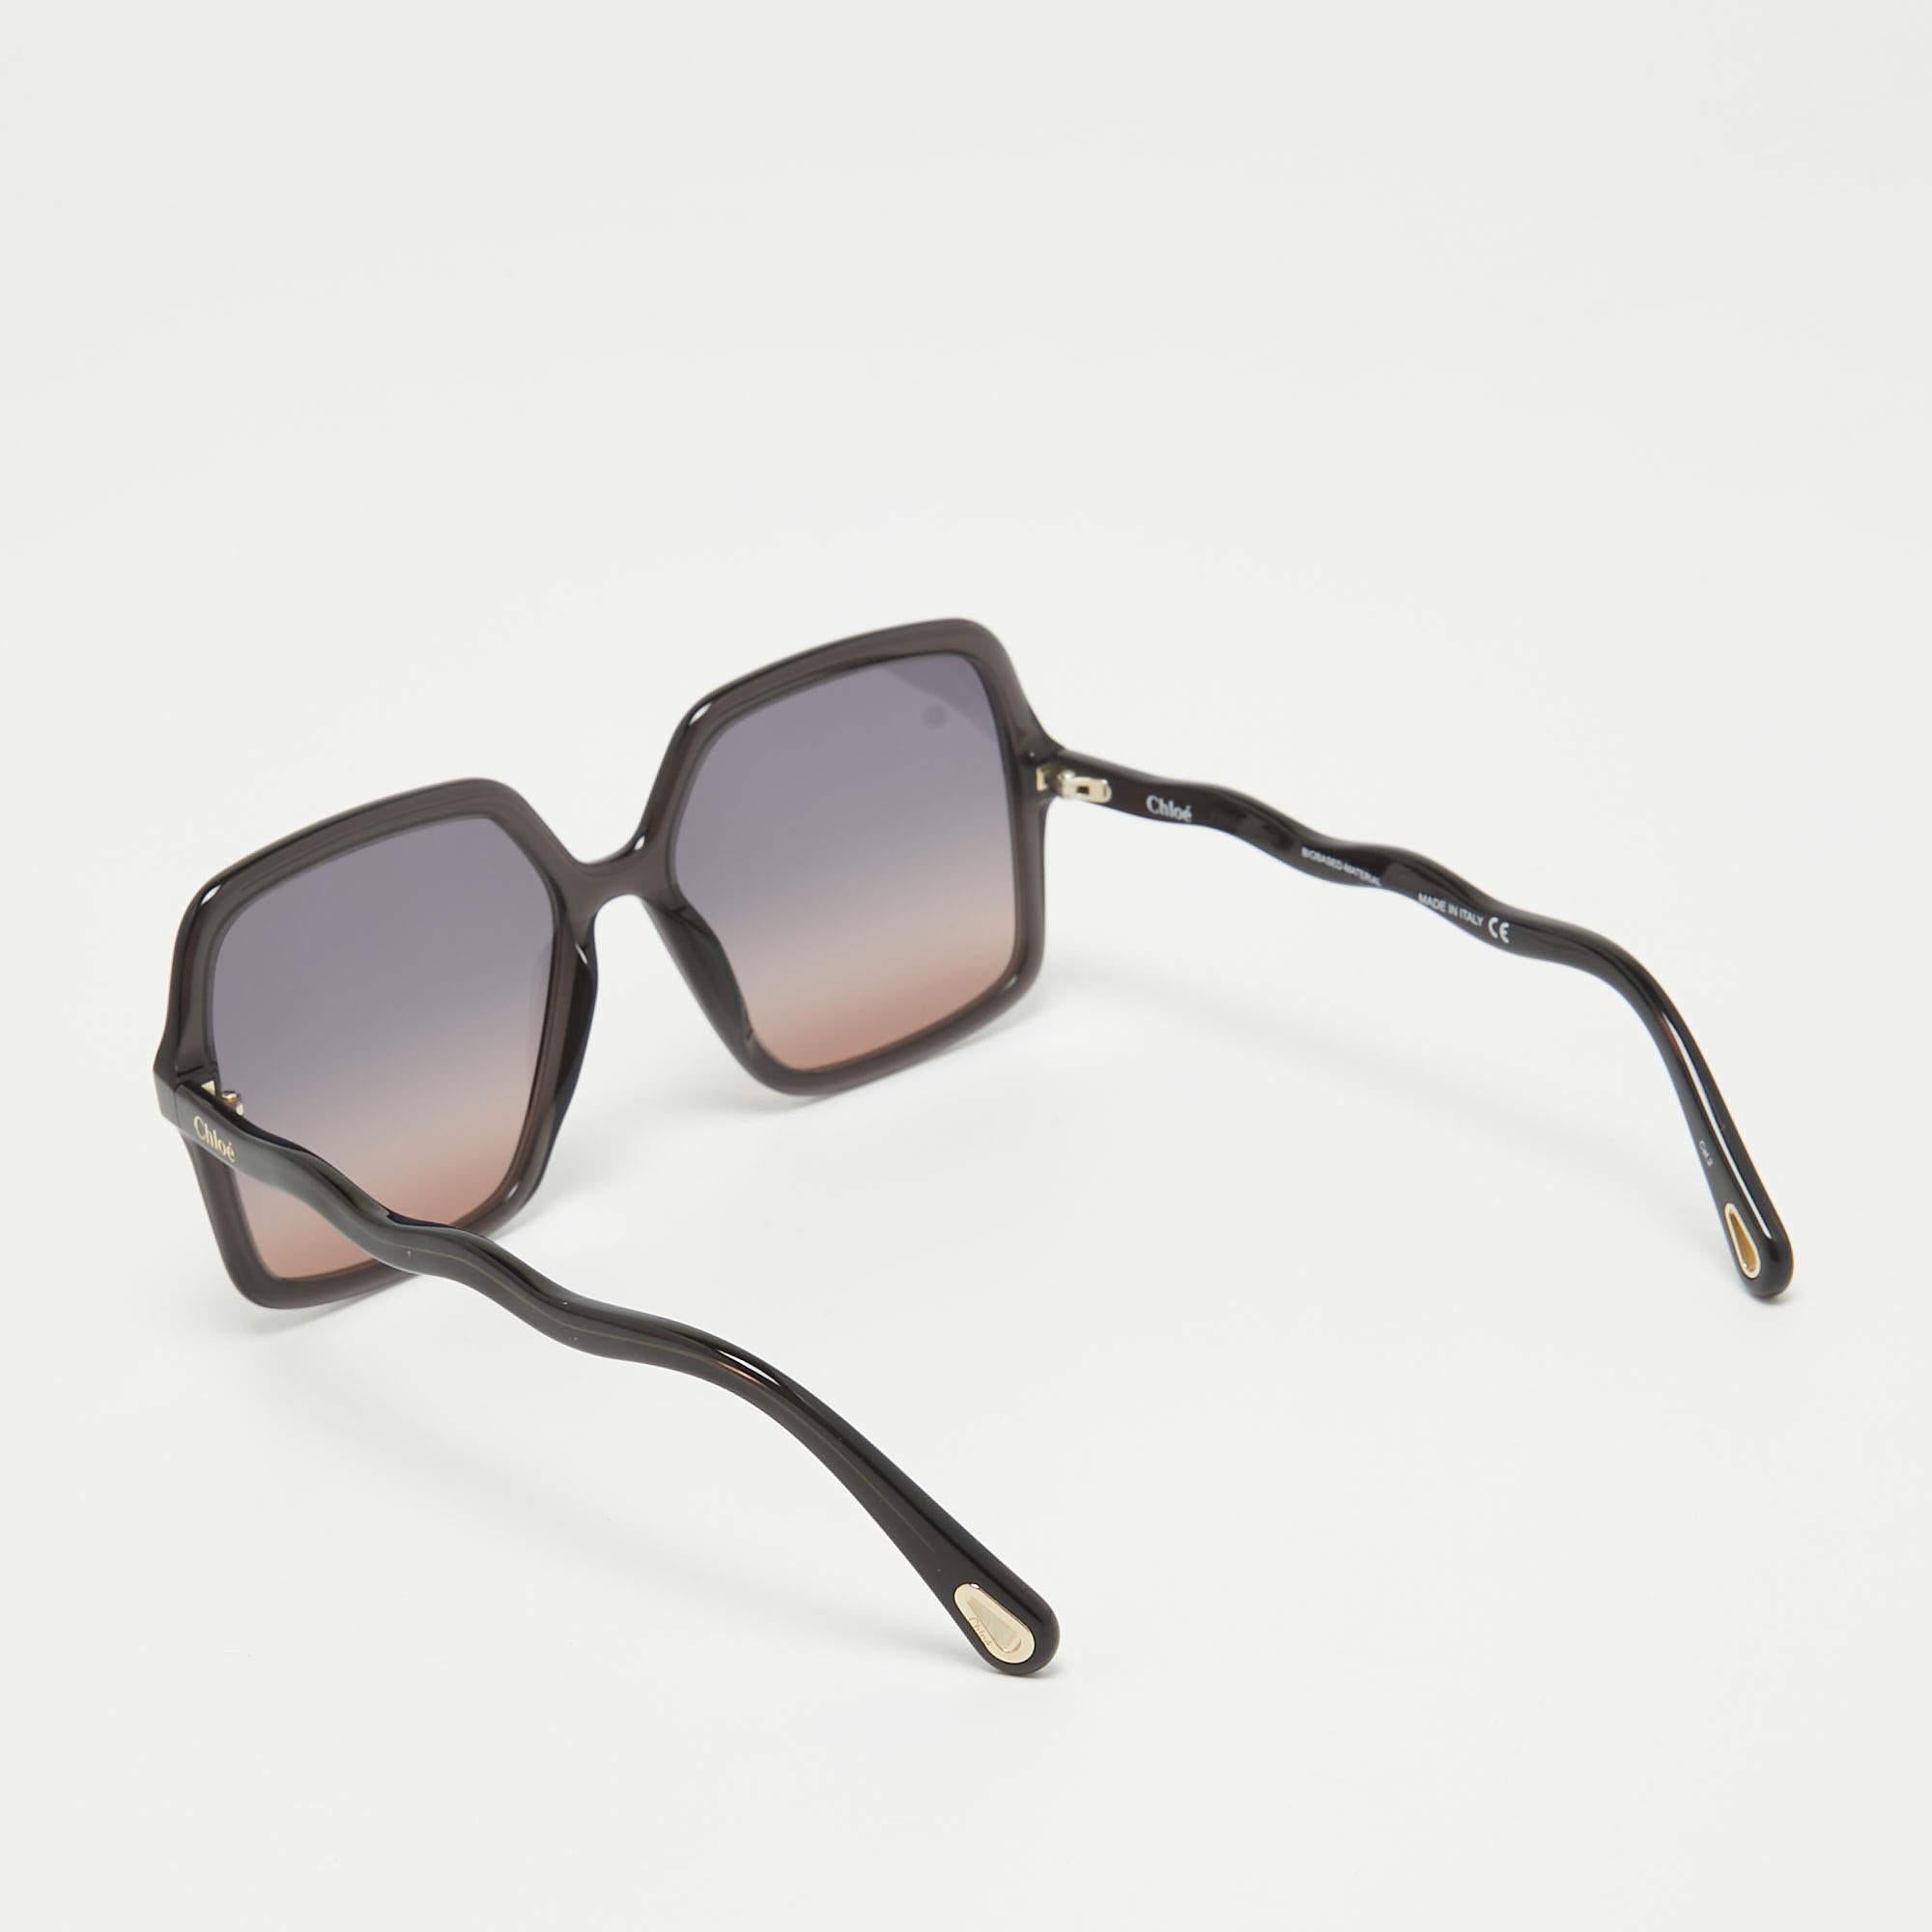 Created by Chloe, these designer sunglasses will be your best friend on any sunny day. It features a well-built frame, top-quality lenses, and signature accents. The pair will make a great buy.

Includes: Original Case, Original Dust Cloth